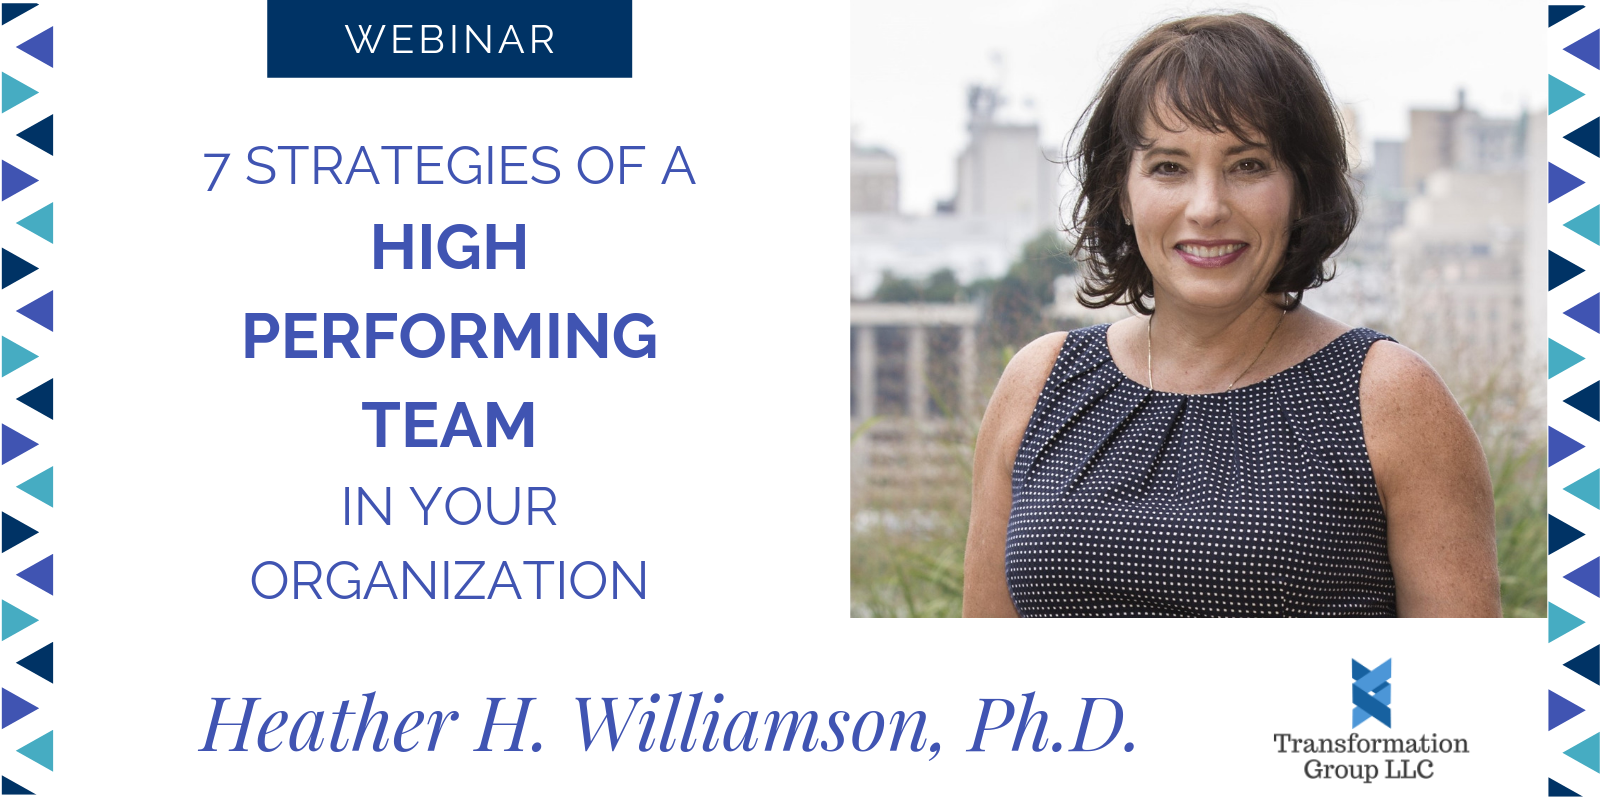 7 Strategies to Build a High-Performing Team in Your Organization (Webinar)